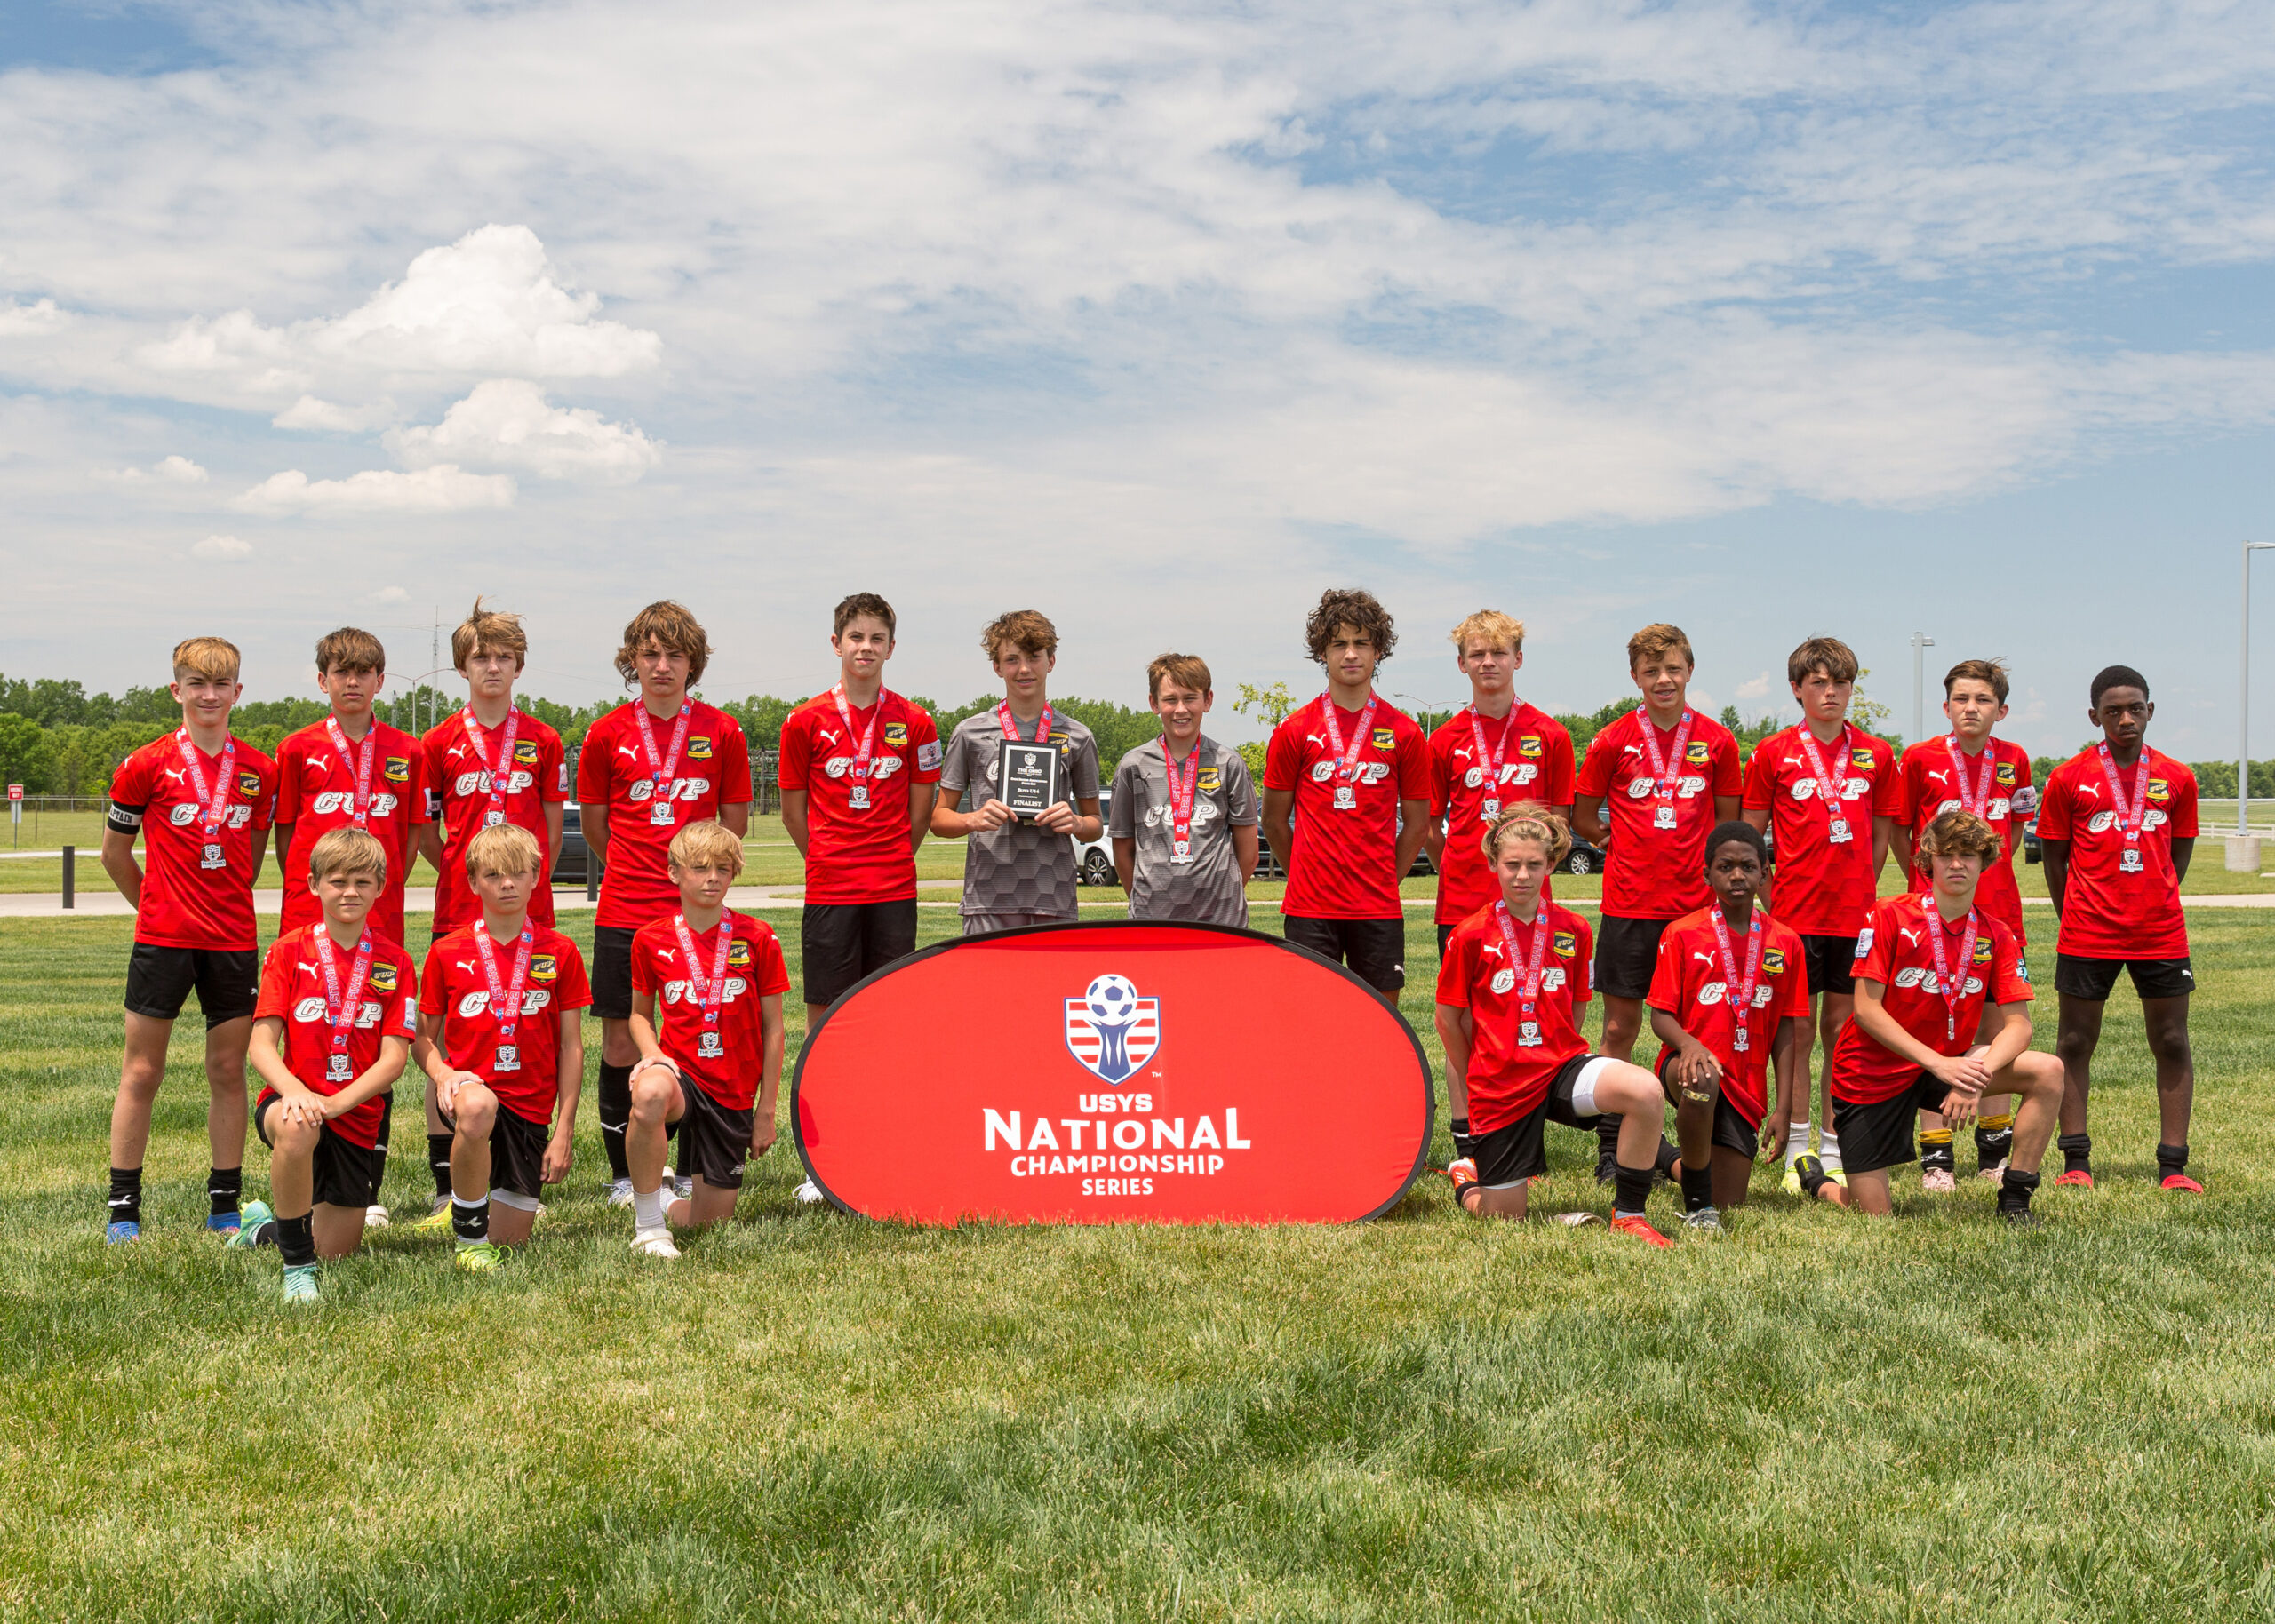 The Ohio State Cup 2021